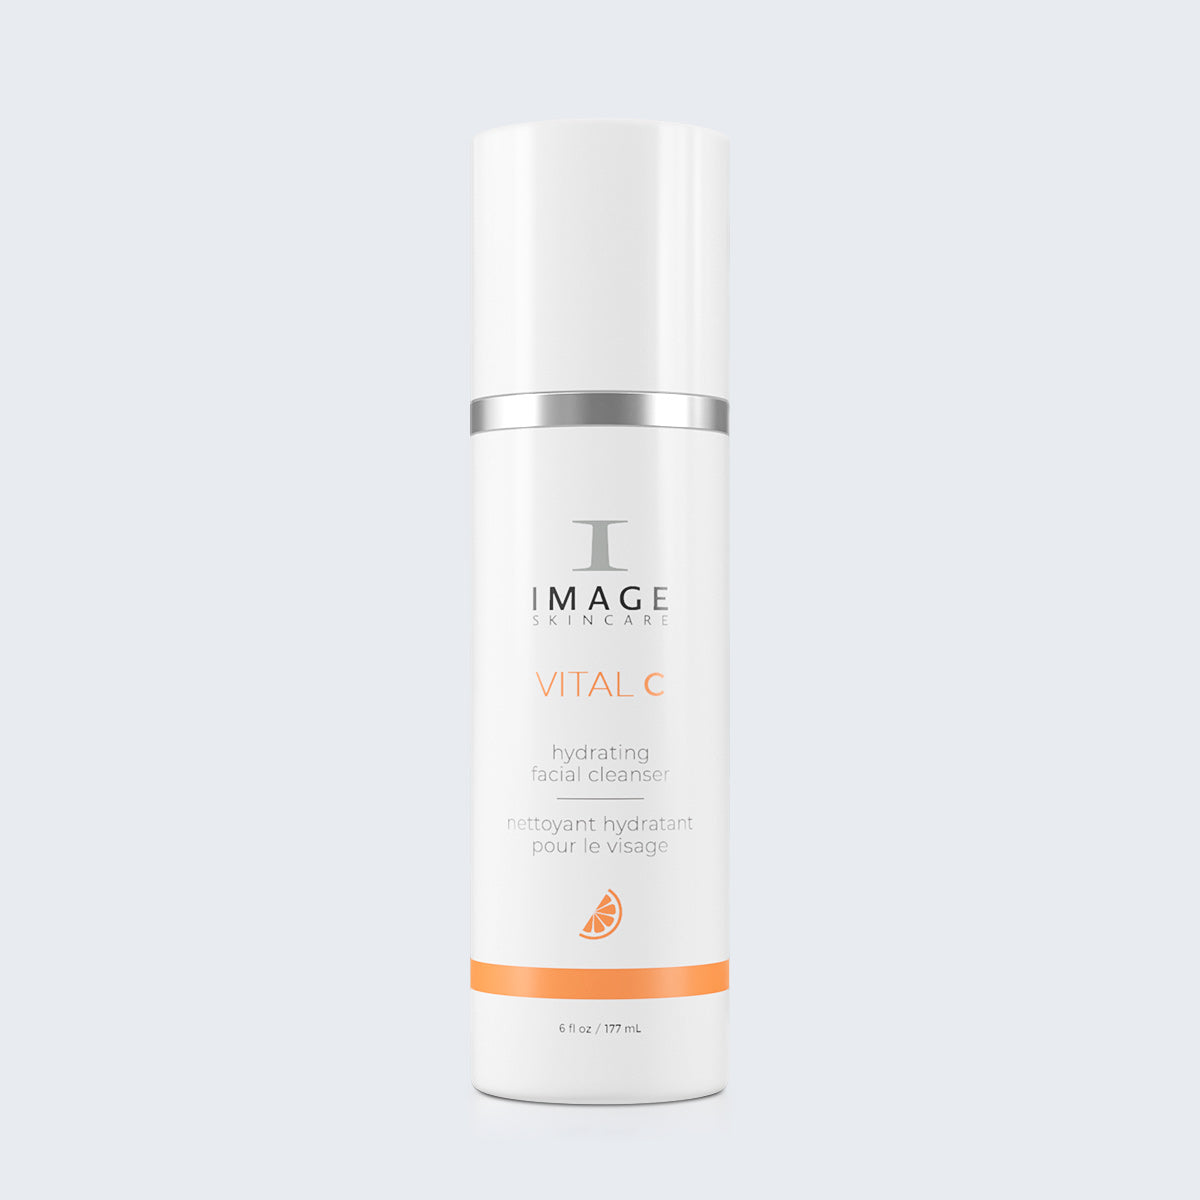 IMAGE Vital C Hydrating Facial Cleanser (6 oz)